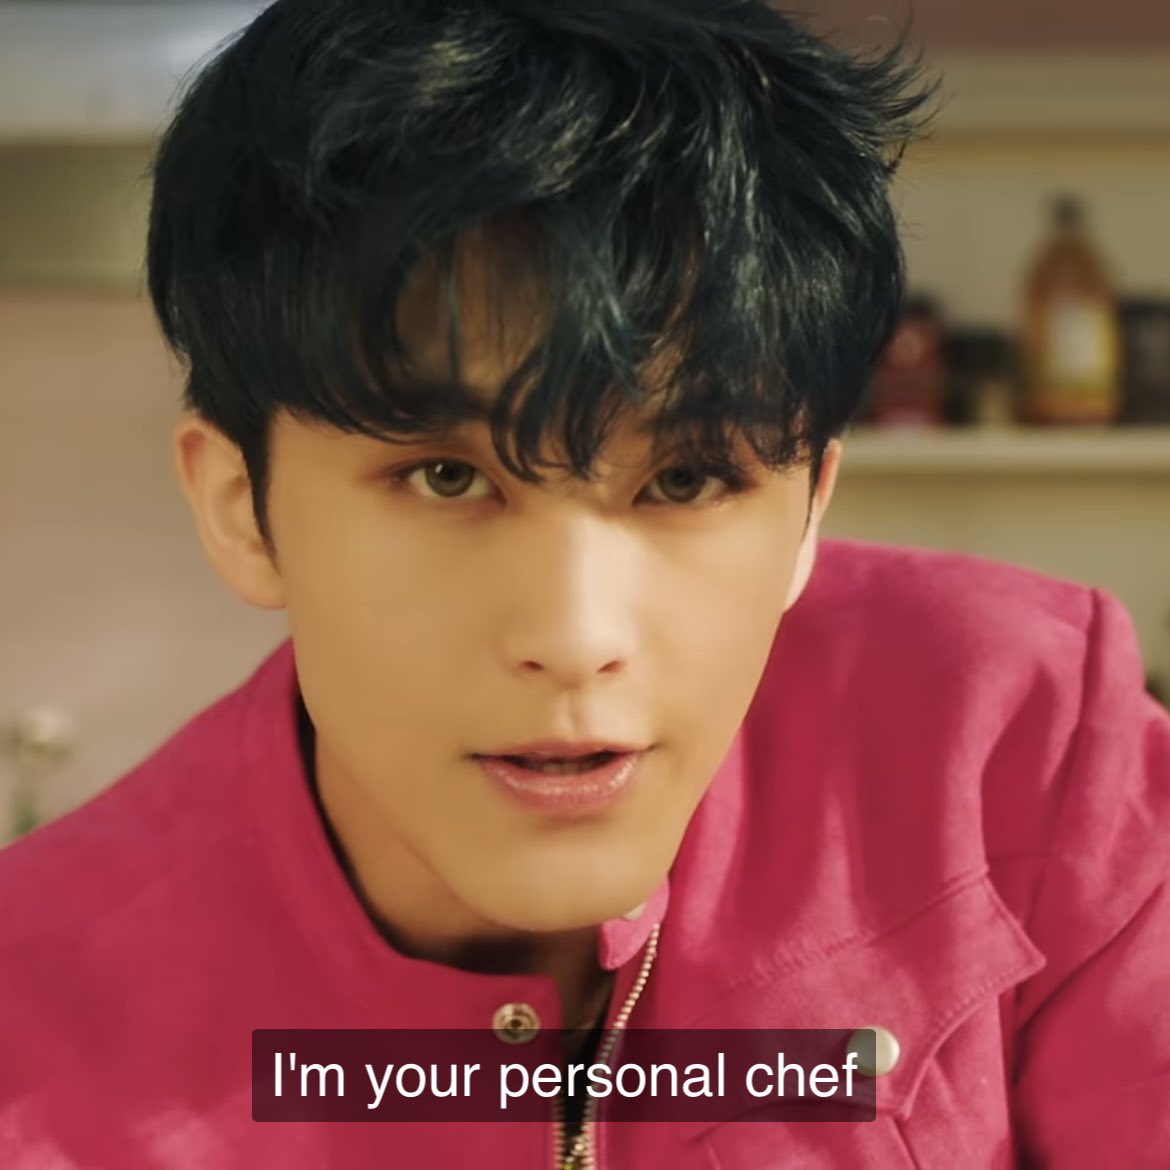 RT @MARKFlTS: Gordon ramsay who? i only know mark lee https://t.co/y7brMviBGO